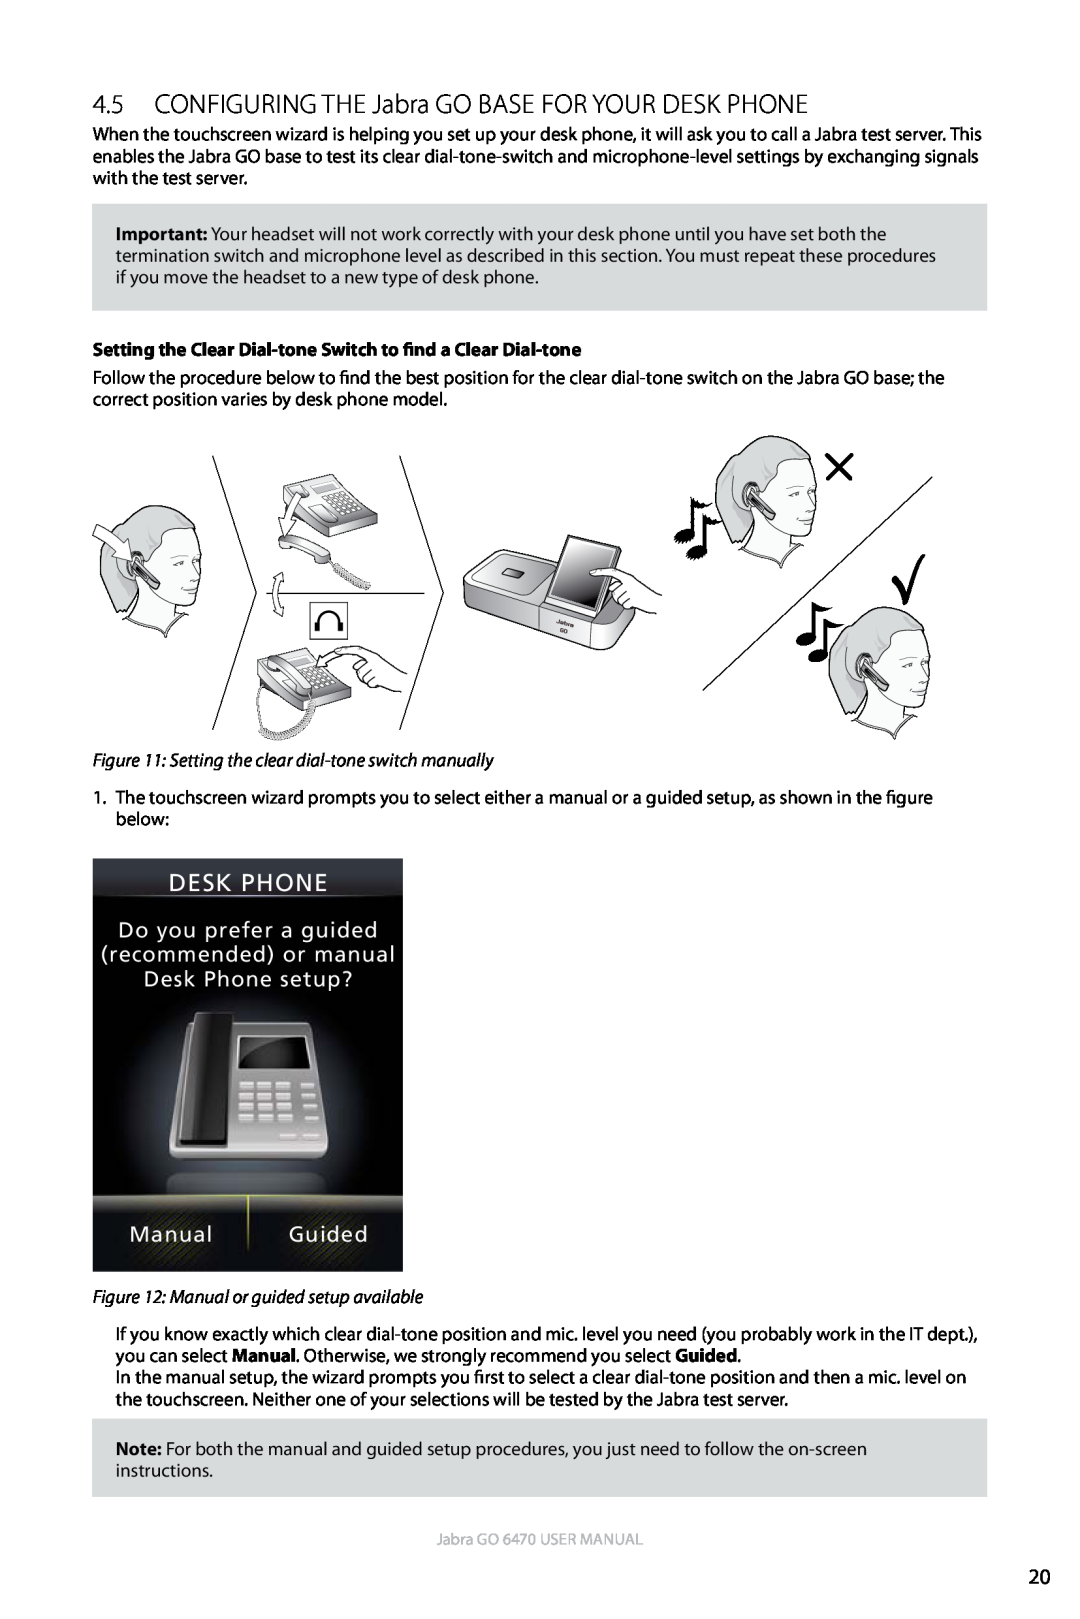 Jabra GO 6470 user manual Do you prefer a guided recommended or manual, Desk Phone setup? Manual Guided 